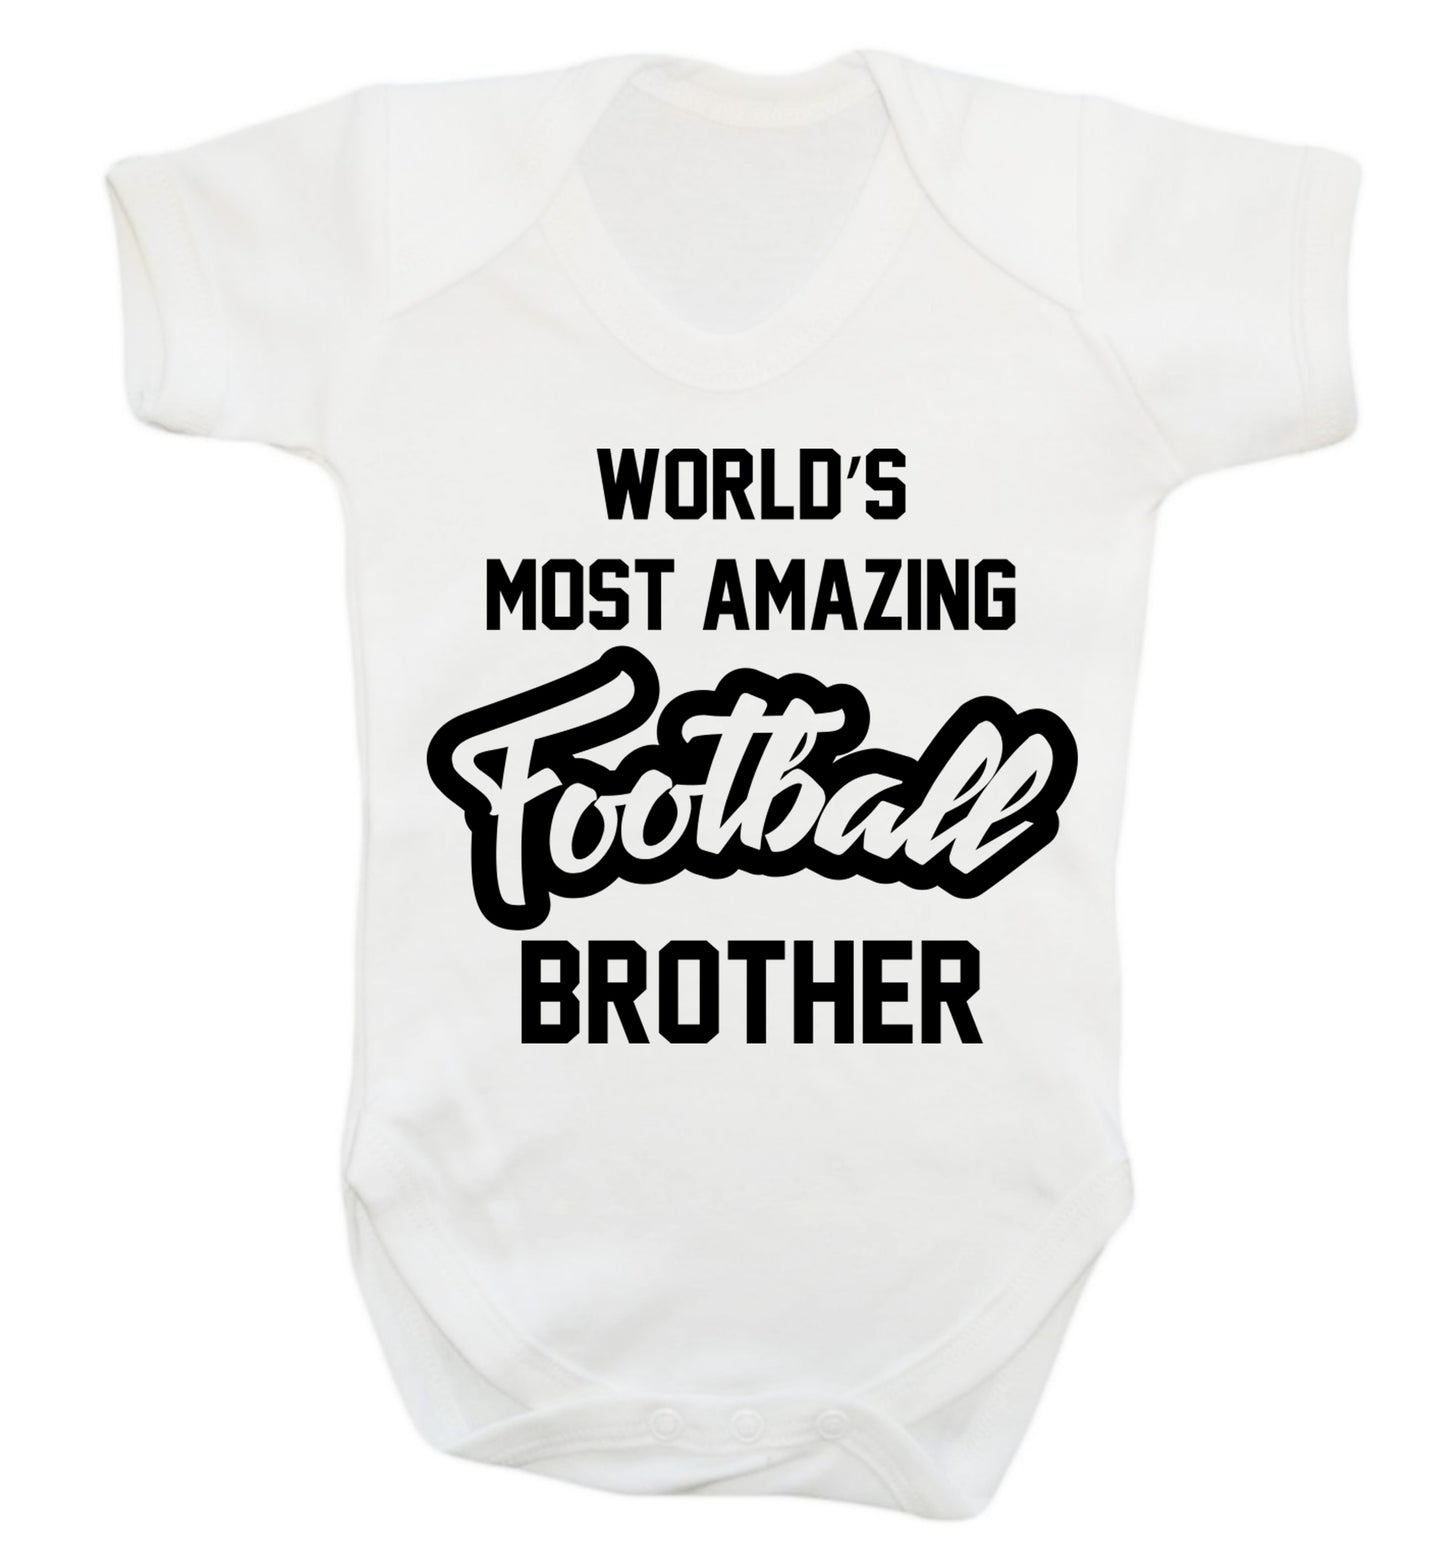 Worlds most amazing football brother Baby Vest white 18-24 months